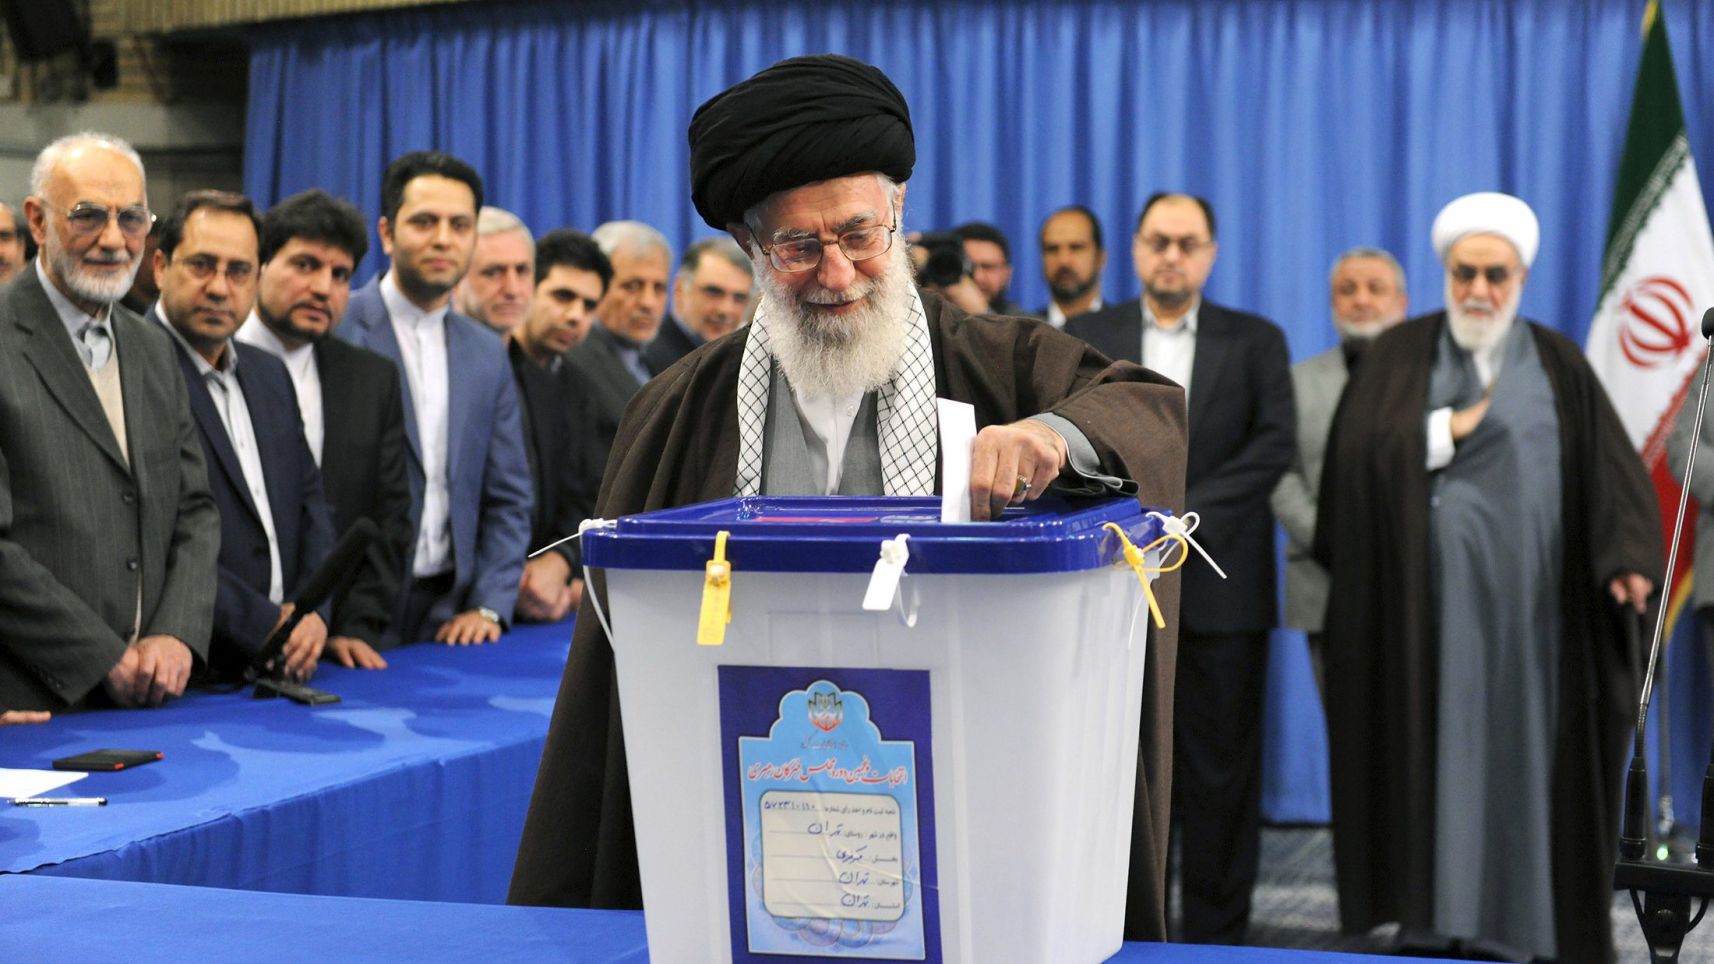 Reformists Set to Make Gains in Iranian Election - MPC JOURNAL - Iran's Supreme Leader Ayatollah Ali Khamenei casts his vote during elections for the parliament and Assembly of Experts. February 26, 2016.Reuters